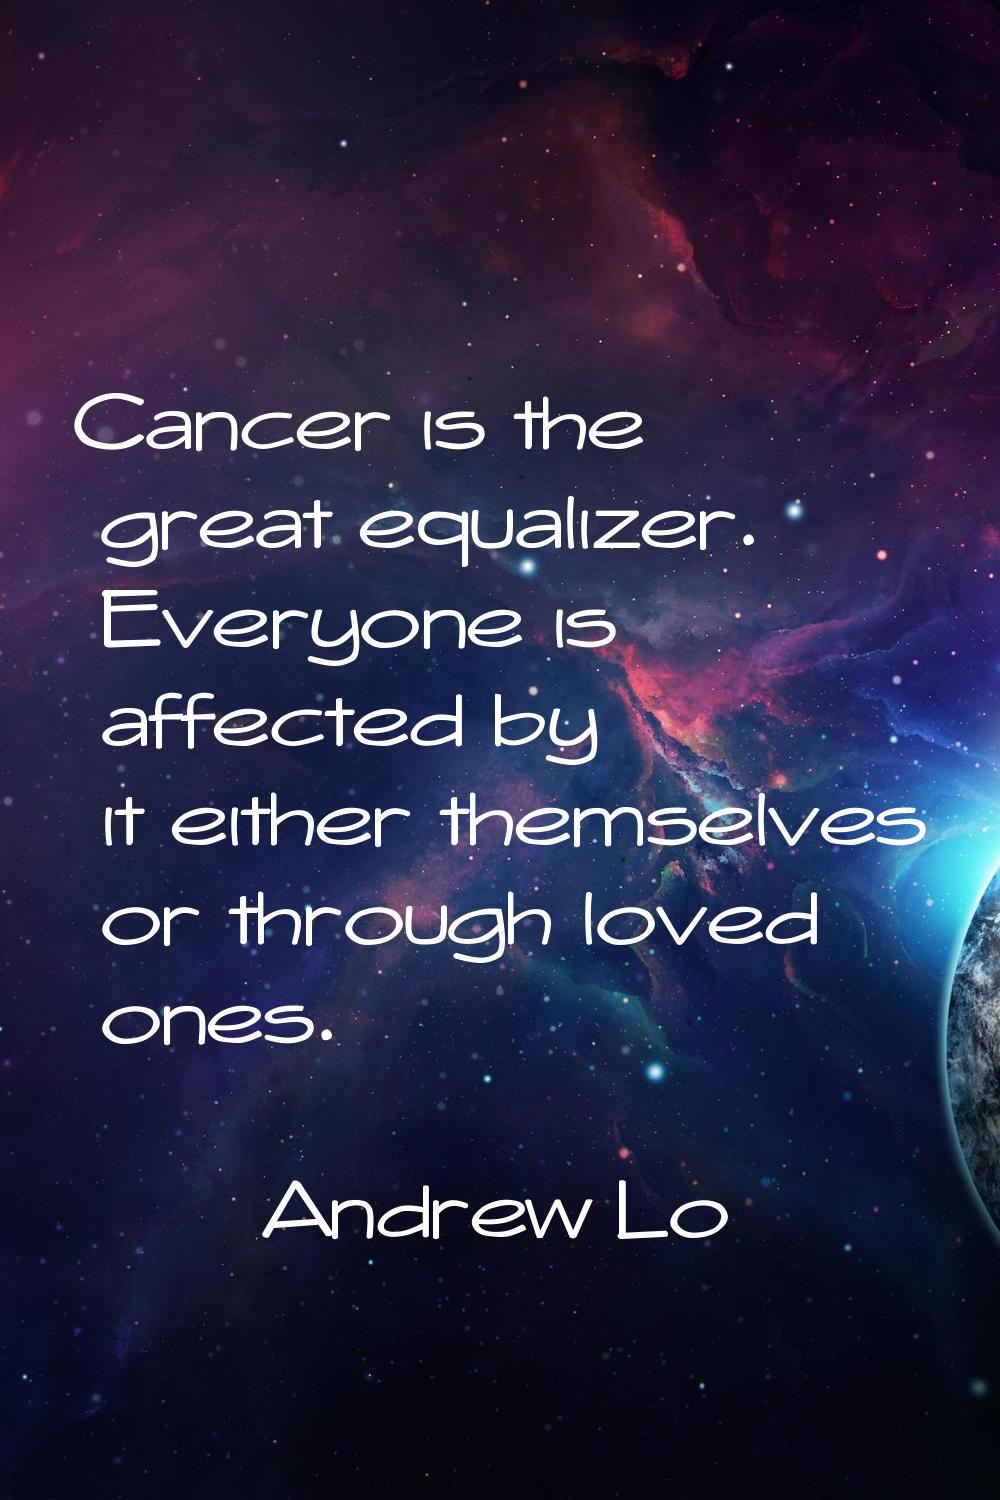 Cancer is the great equalizer. Everyone is affected by it either themselves or through loved ones.